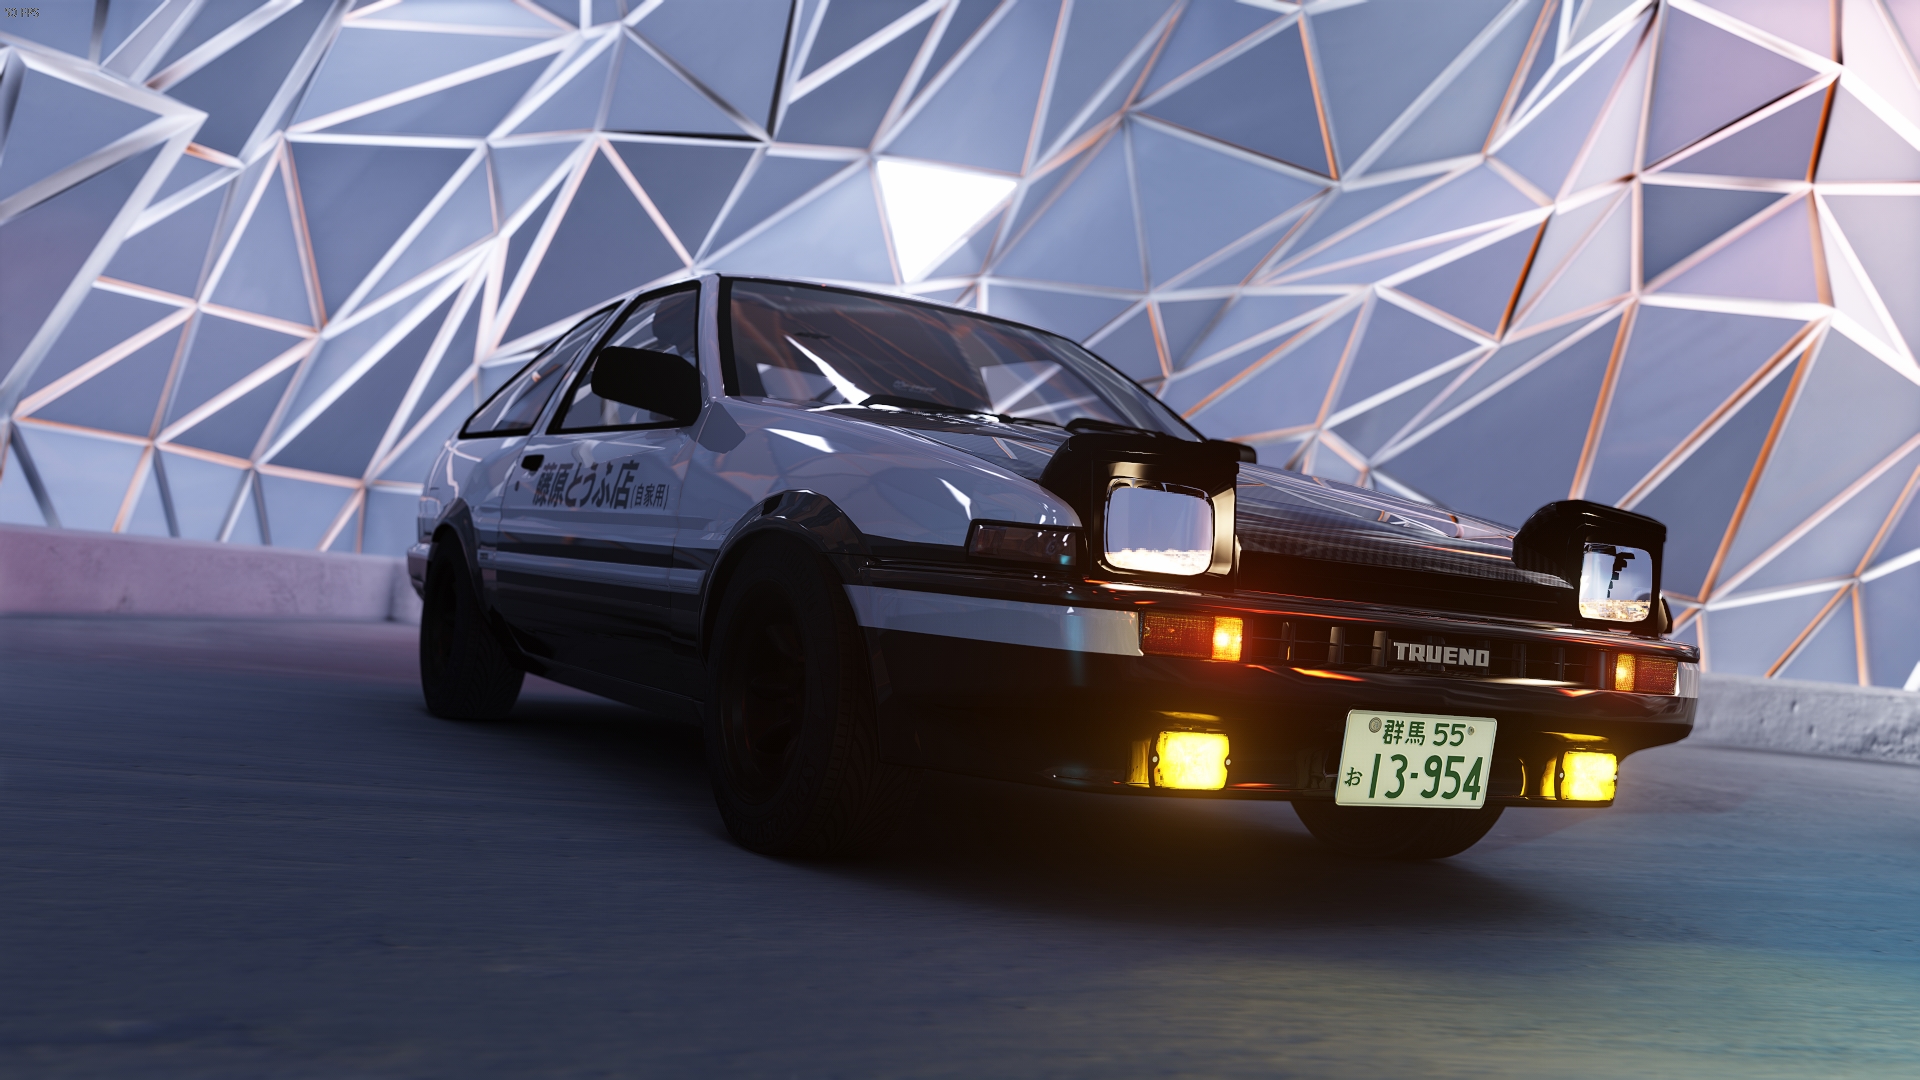 Toyota Ae86 wallpaper by TR4SHK4RT  Download on ZEDGE  7d4a